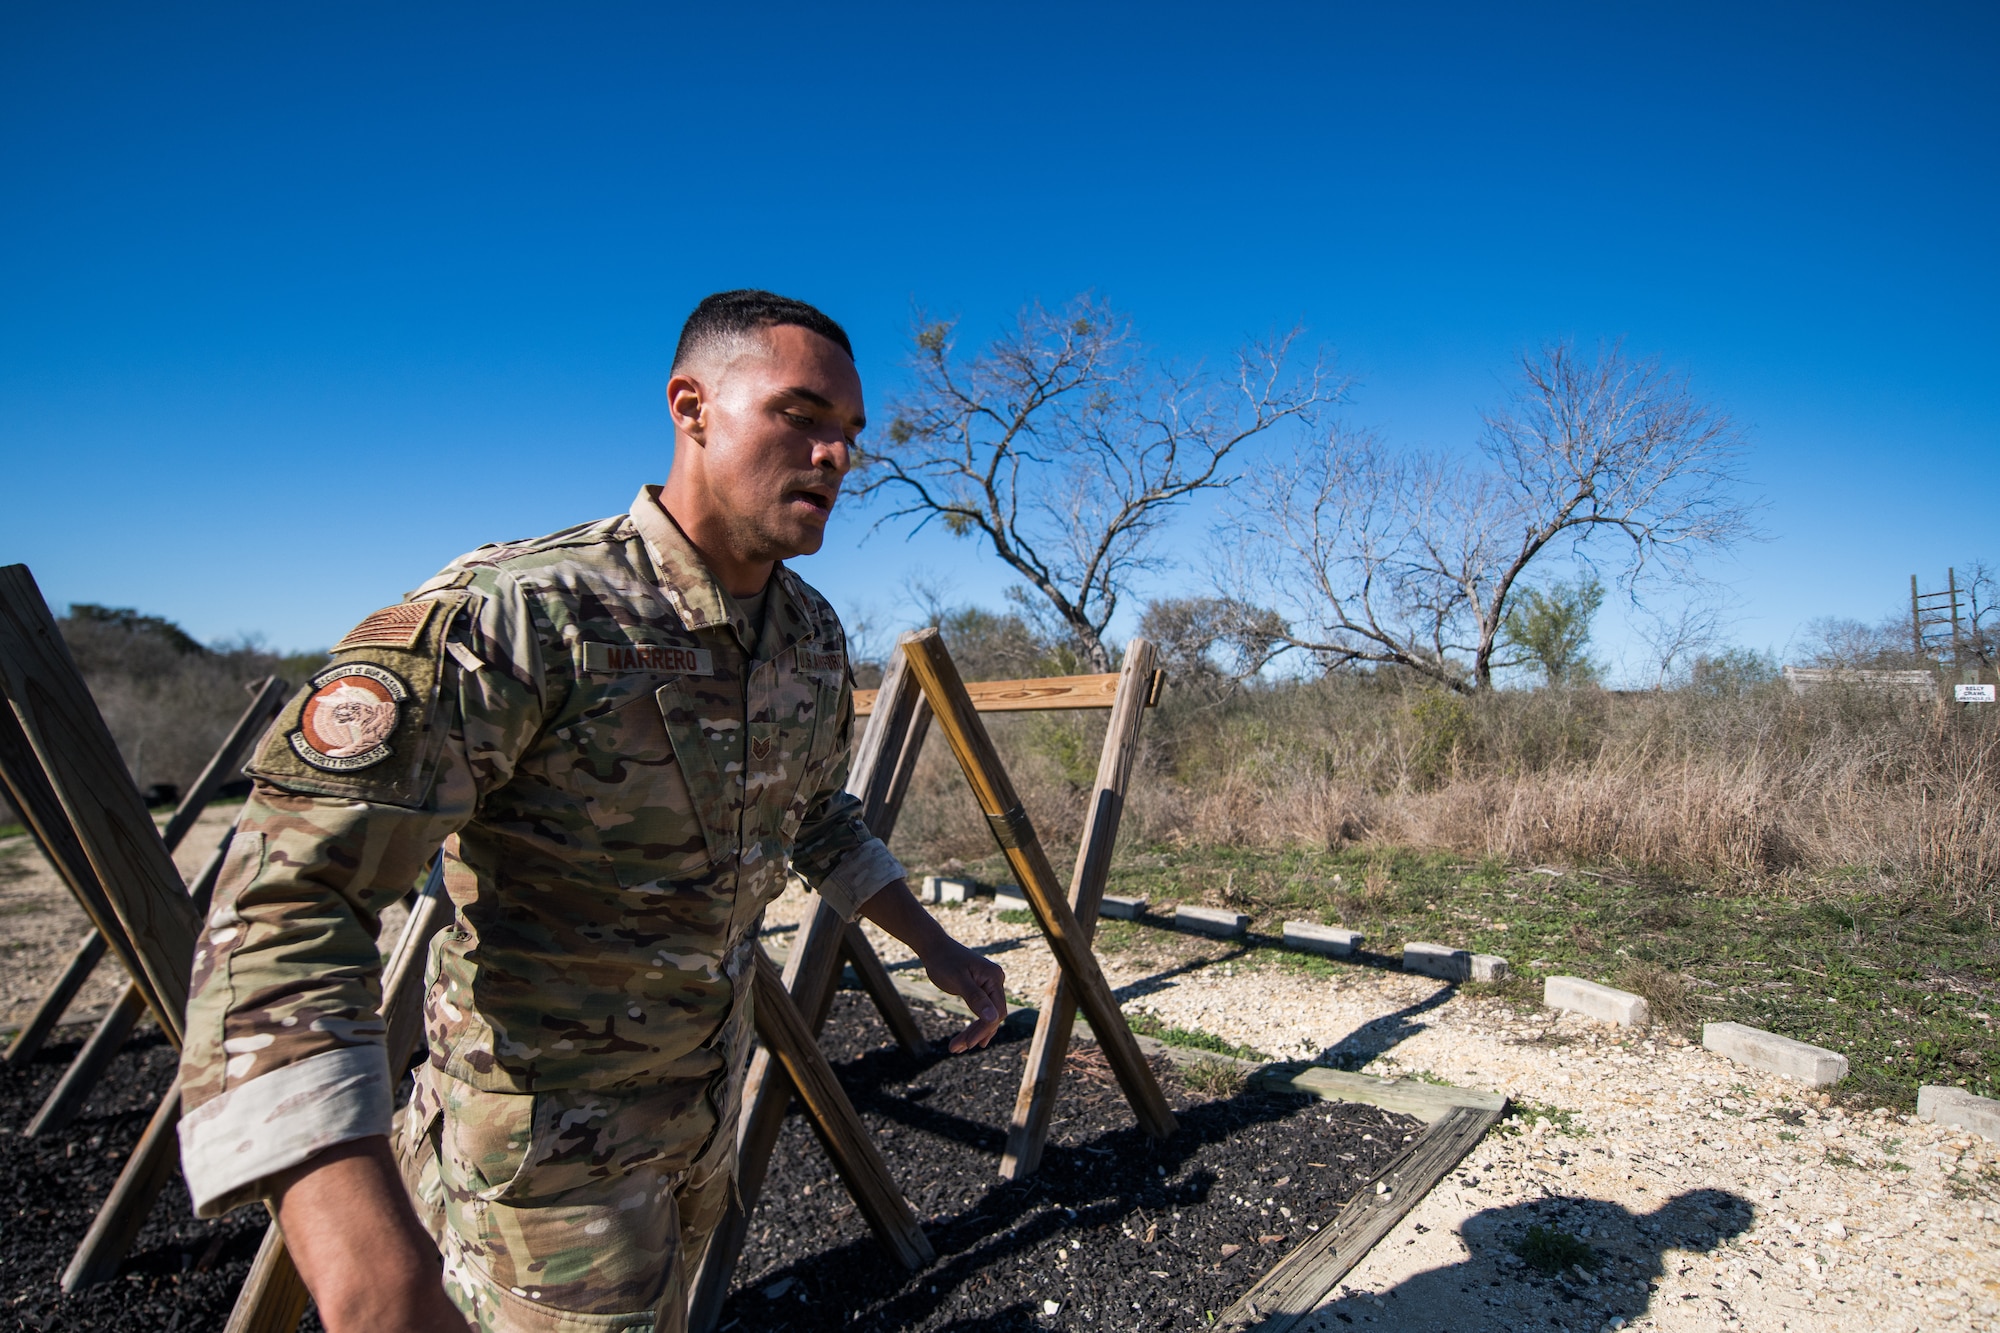 U.S. Air Force Staff Sgt. Richard Marrero, 97th Security Forces Squadron, Altus Air Force Base, Okla., takes part in the obstacle course portion of the Air Education and Training Command Defender Challenge team tryout at Joint Base San Antonio-Medina Annex, Texas, Jan. 29, 2020. The five-day selection camp includes a physical fitness test, M-9 and M-4 weapons firing, the alpha warrior obstacle course, a ruck march and also includes a military working dog tryout as well. A total of 27 Airmen, including five MWD handlers and their canine partners, were invited to tryout for the team. The seven selectees to the AETC team will represent the First Command at the career field’s world-wide competition that will be held at JBSA-Camp Bullis in May 2020. (U.S. Air Force photo by Sarayuth Pinthong)